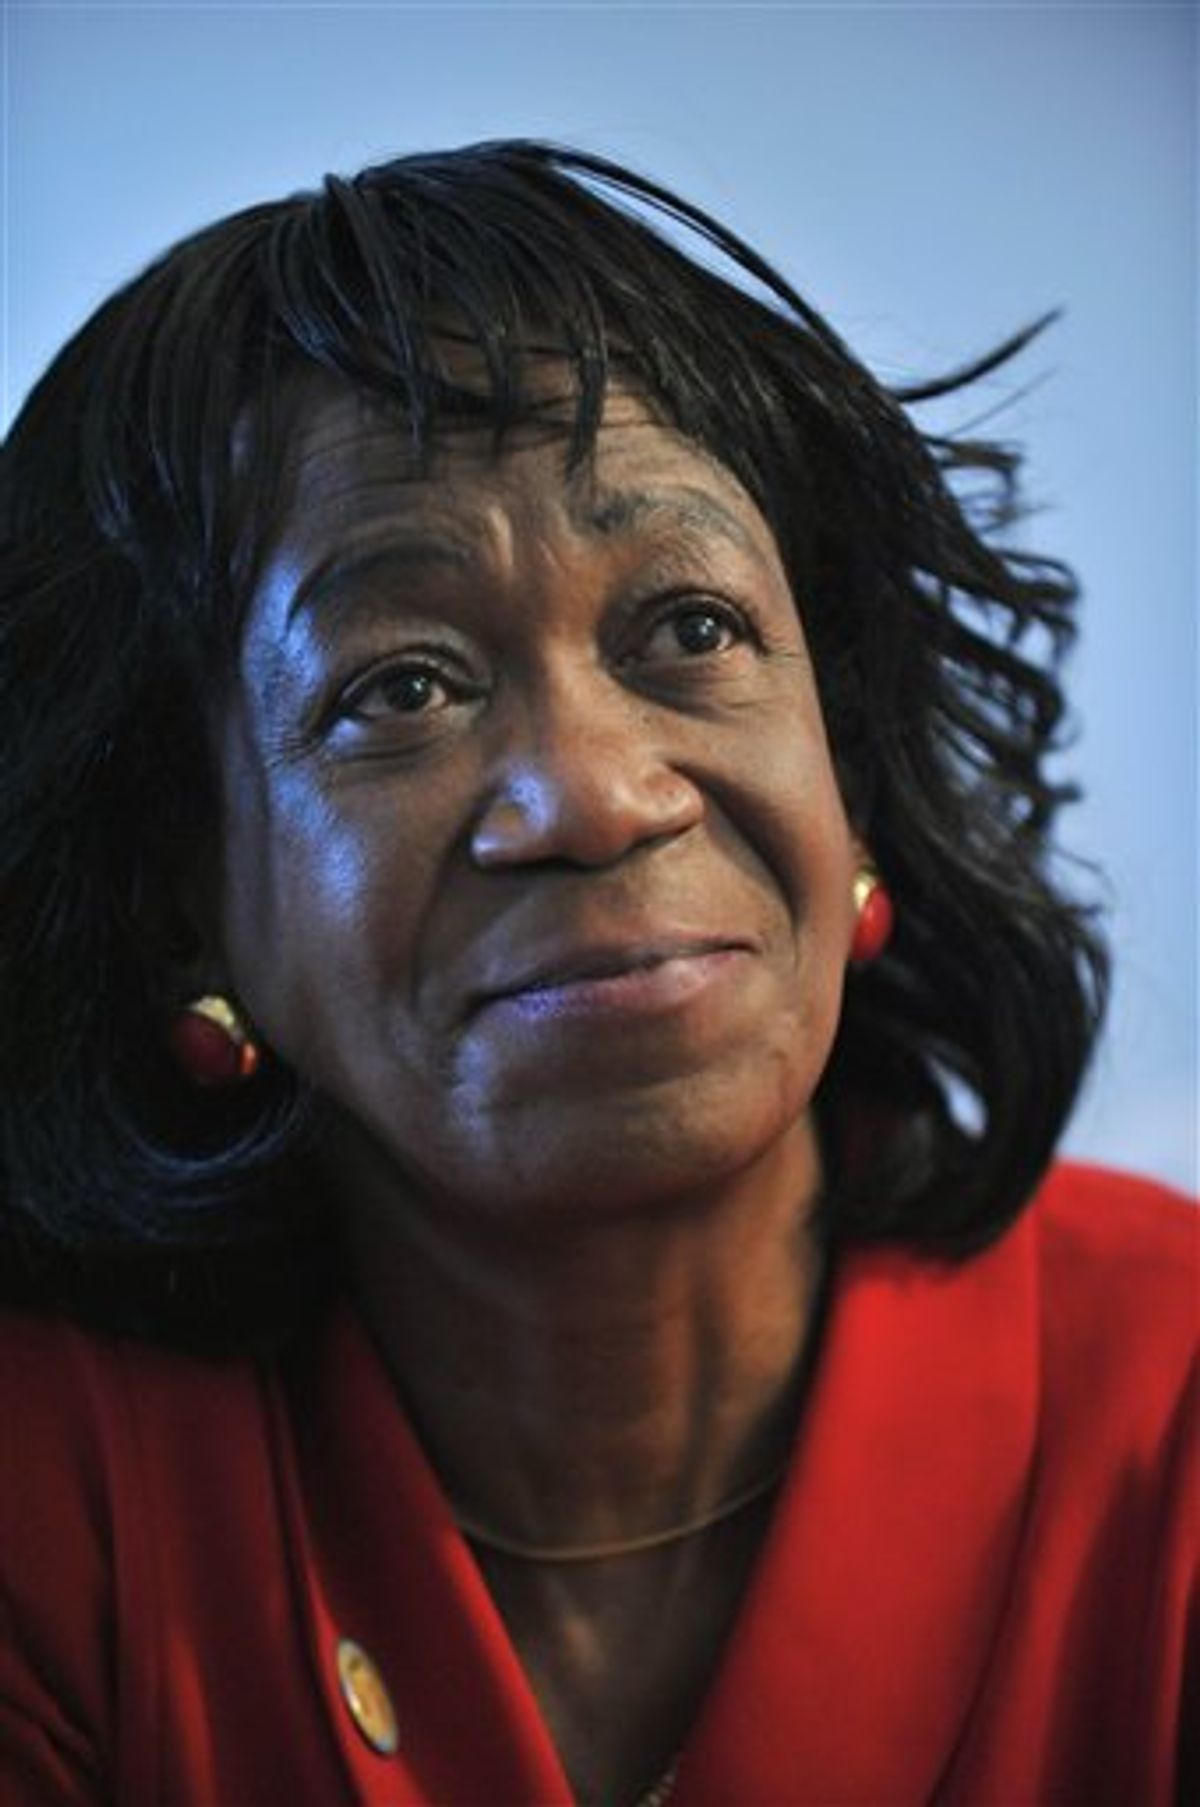 In this Tuesday, Nov. 24, 2009 photo, President Obama's aunt, Zeituni Onyango, speaks to The Associated Press during an interview in her home in Boston.   (AP Photo/Josh Reynolds) (Associated Press)